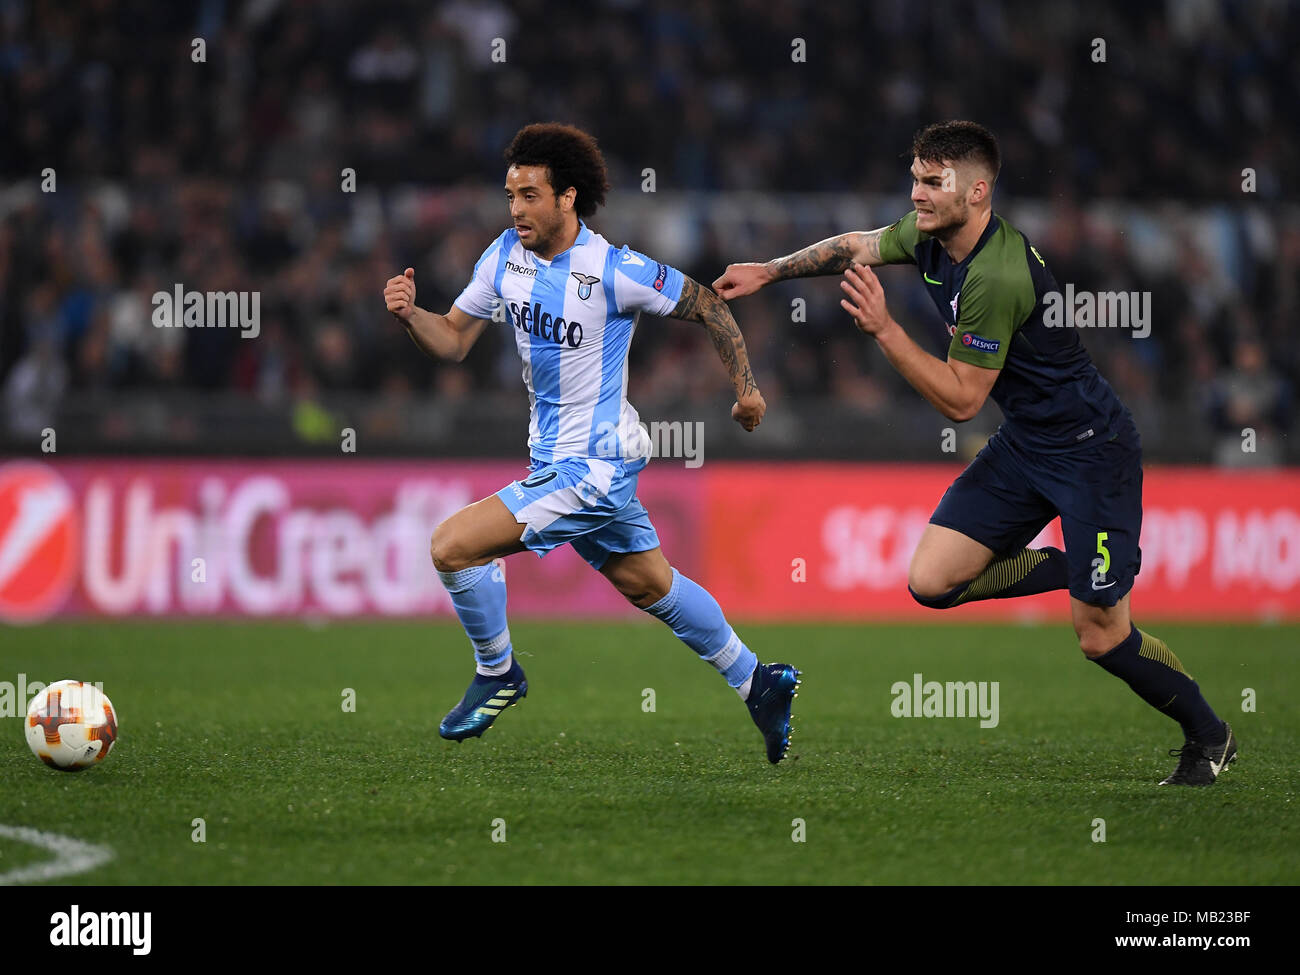 Rome, Italy. 5th Apr, 2018. Lazio's Felipe Anderson competes with Salzburg's Caleta-Car during an Europa League quarter-finals first leg match between Lazio and Salzburg in Rome, Italy, April 5, 2018. Lazio wins 4-2. Credit: Alberto Lingria/Xinhua/Alamy Live News Stock Photo